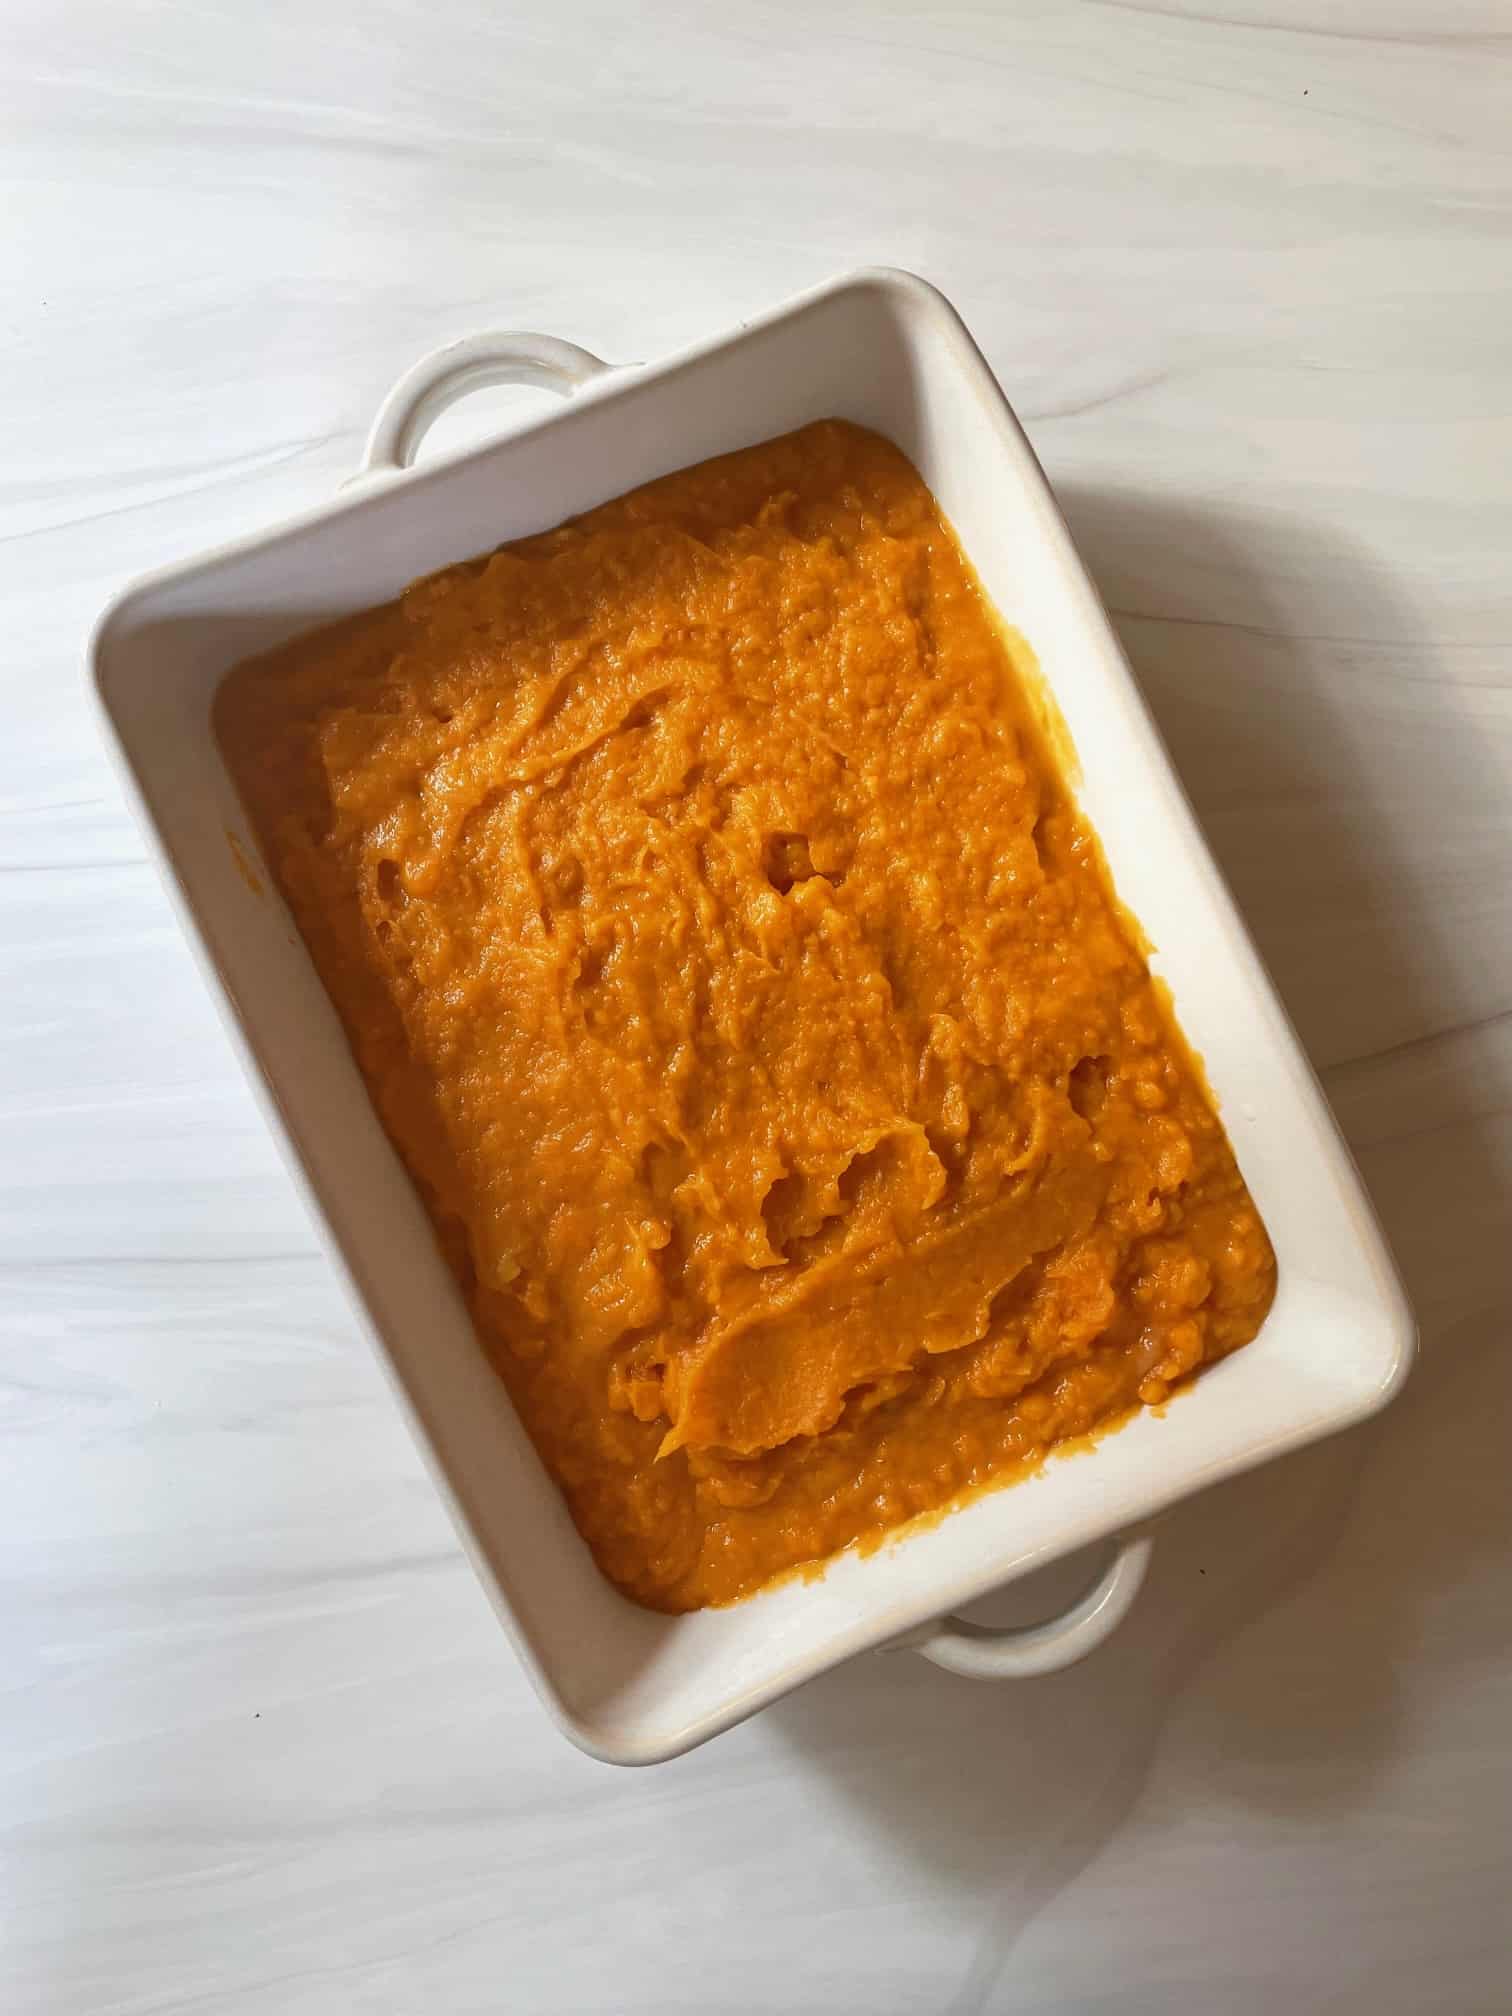 Mashed sweet potatoes mixed with liquid ingredients spread out in a white casserole dish